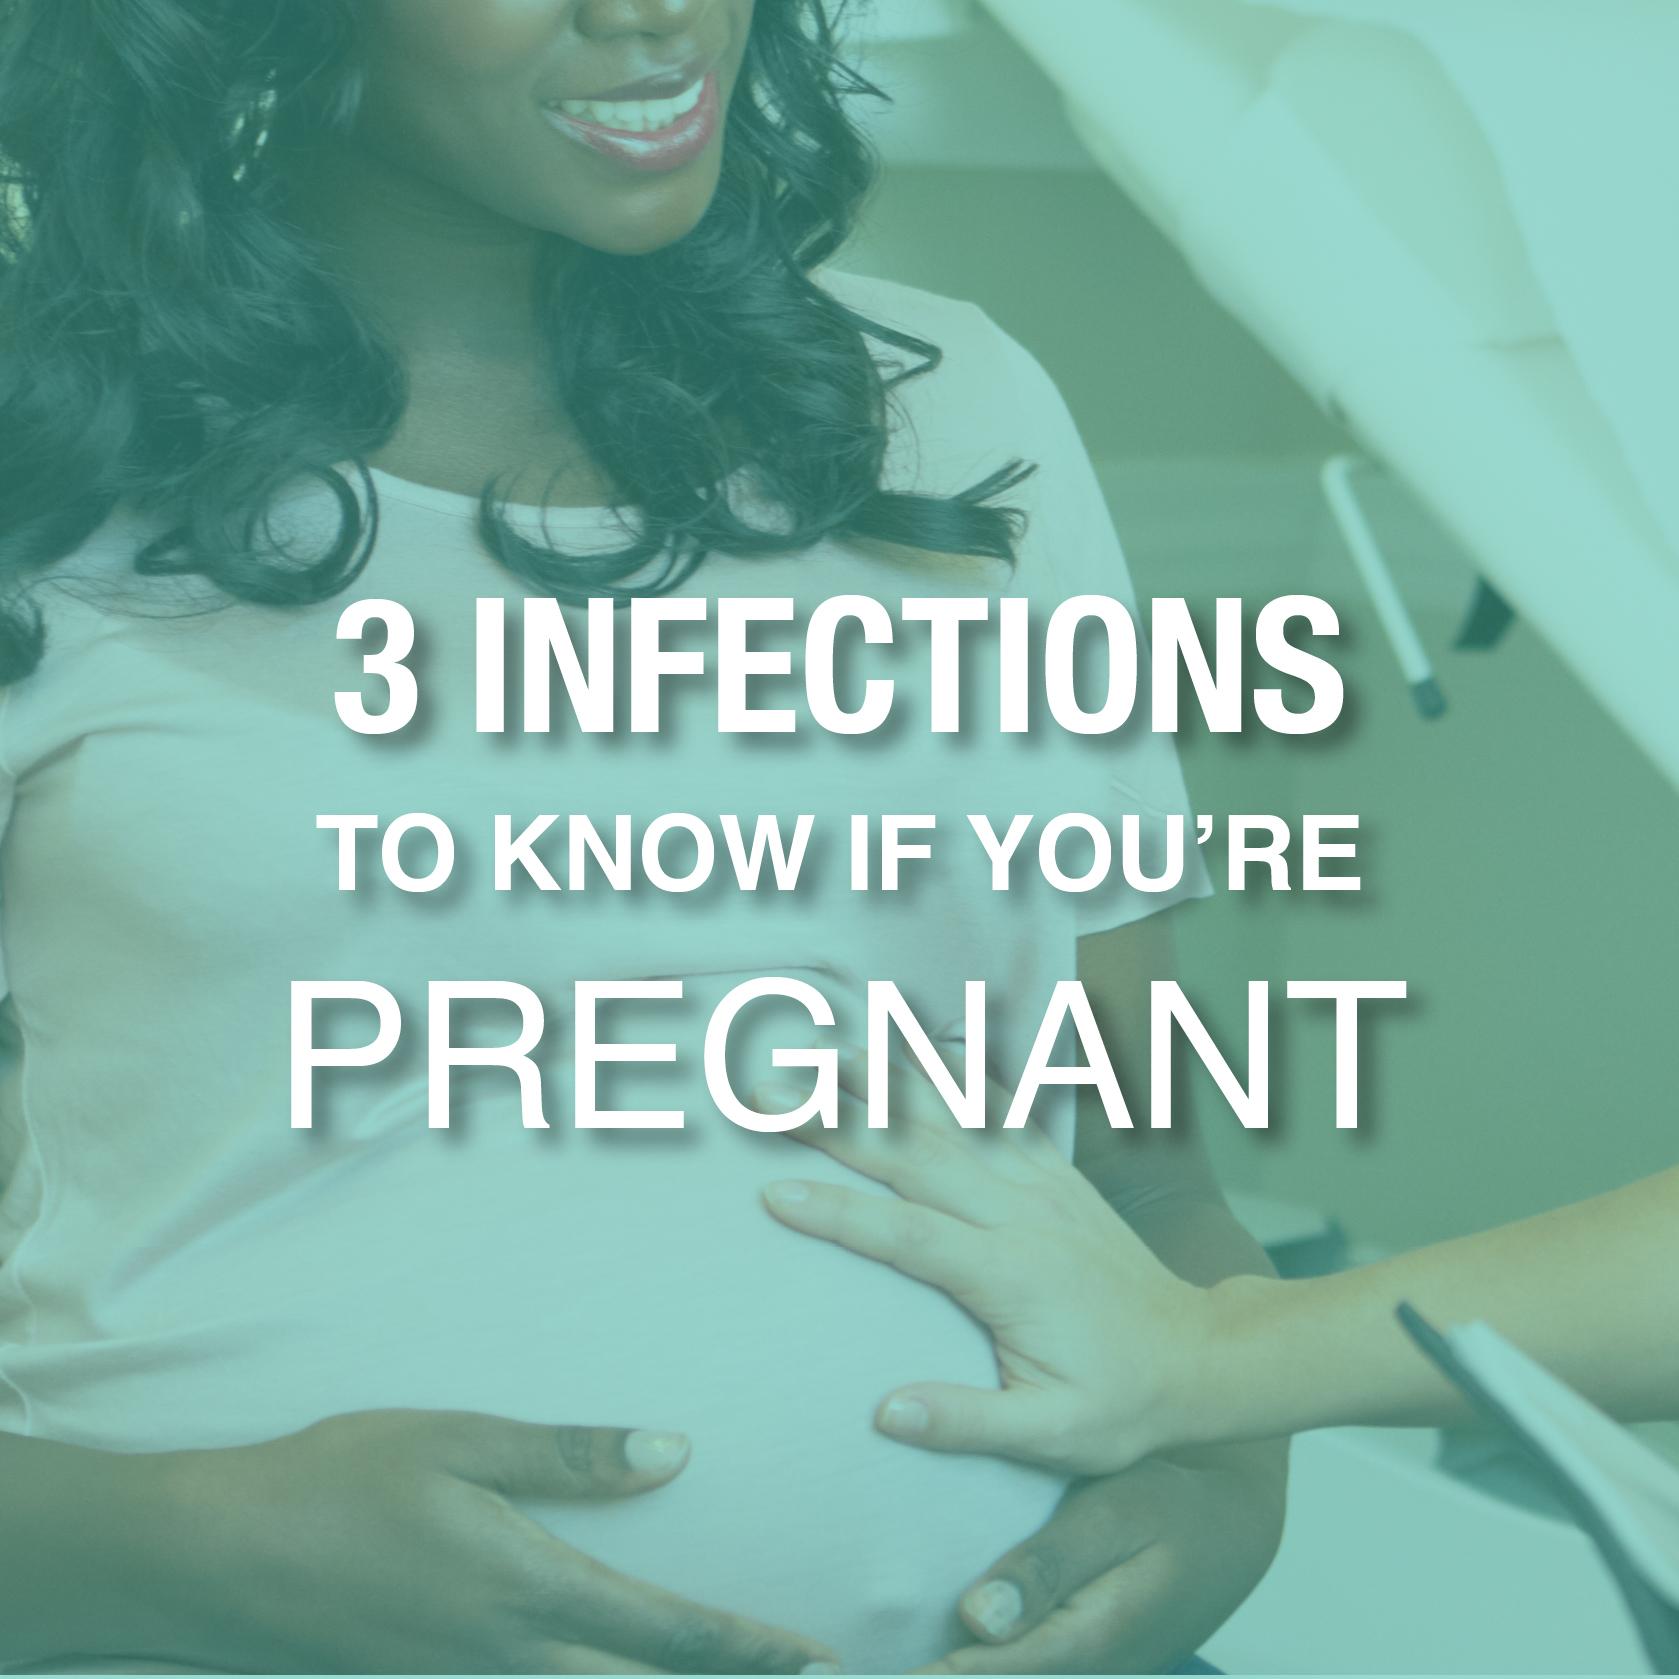 Prenatal Infection Prevention Month: 3 Infections to Know About if You’re Pregnant